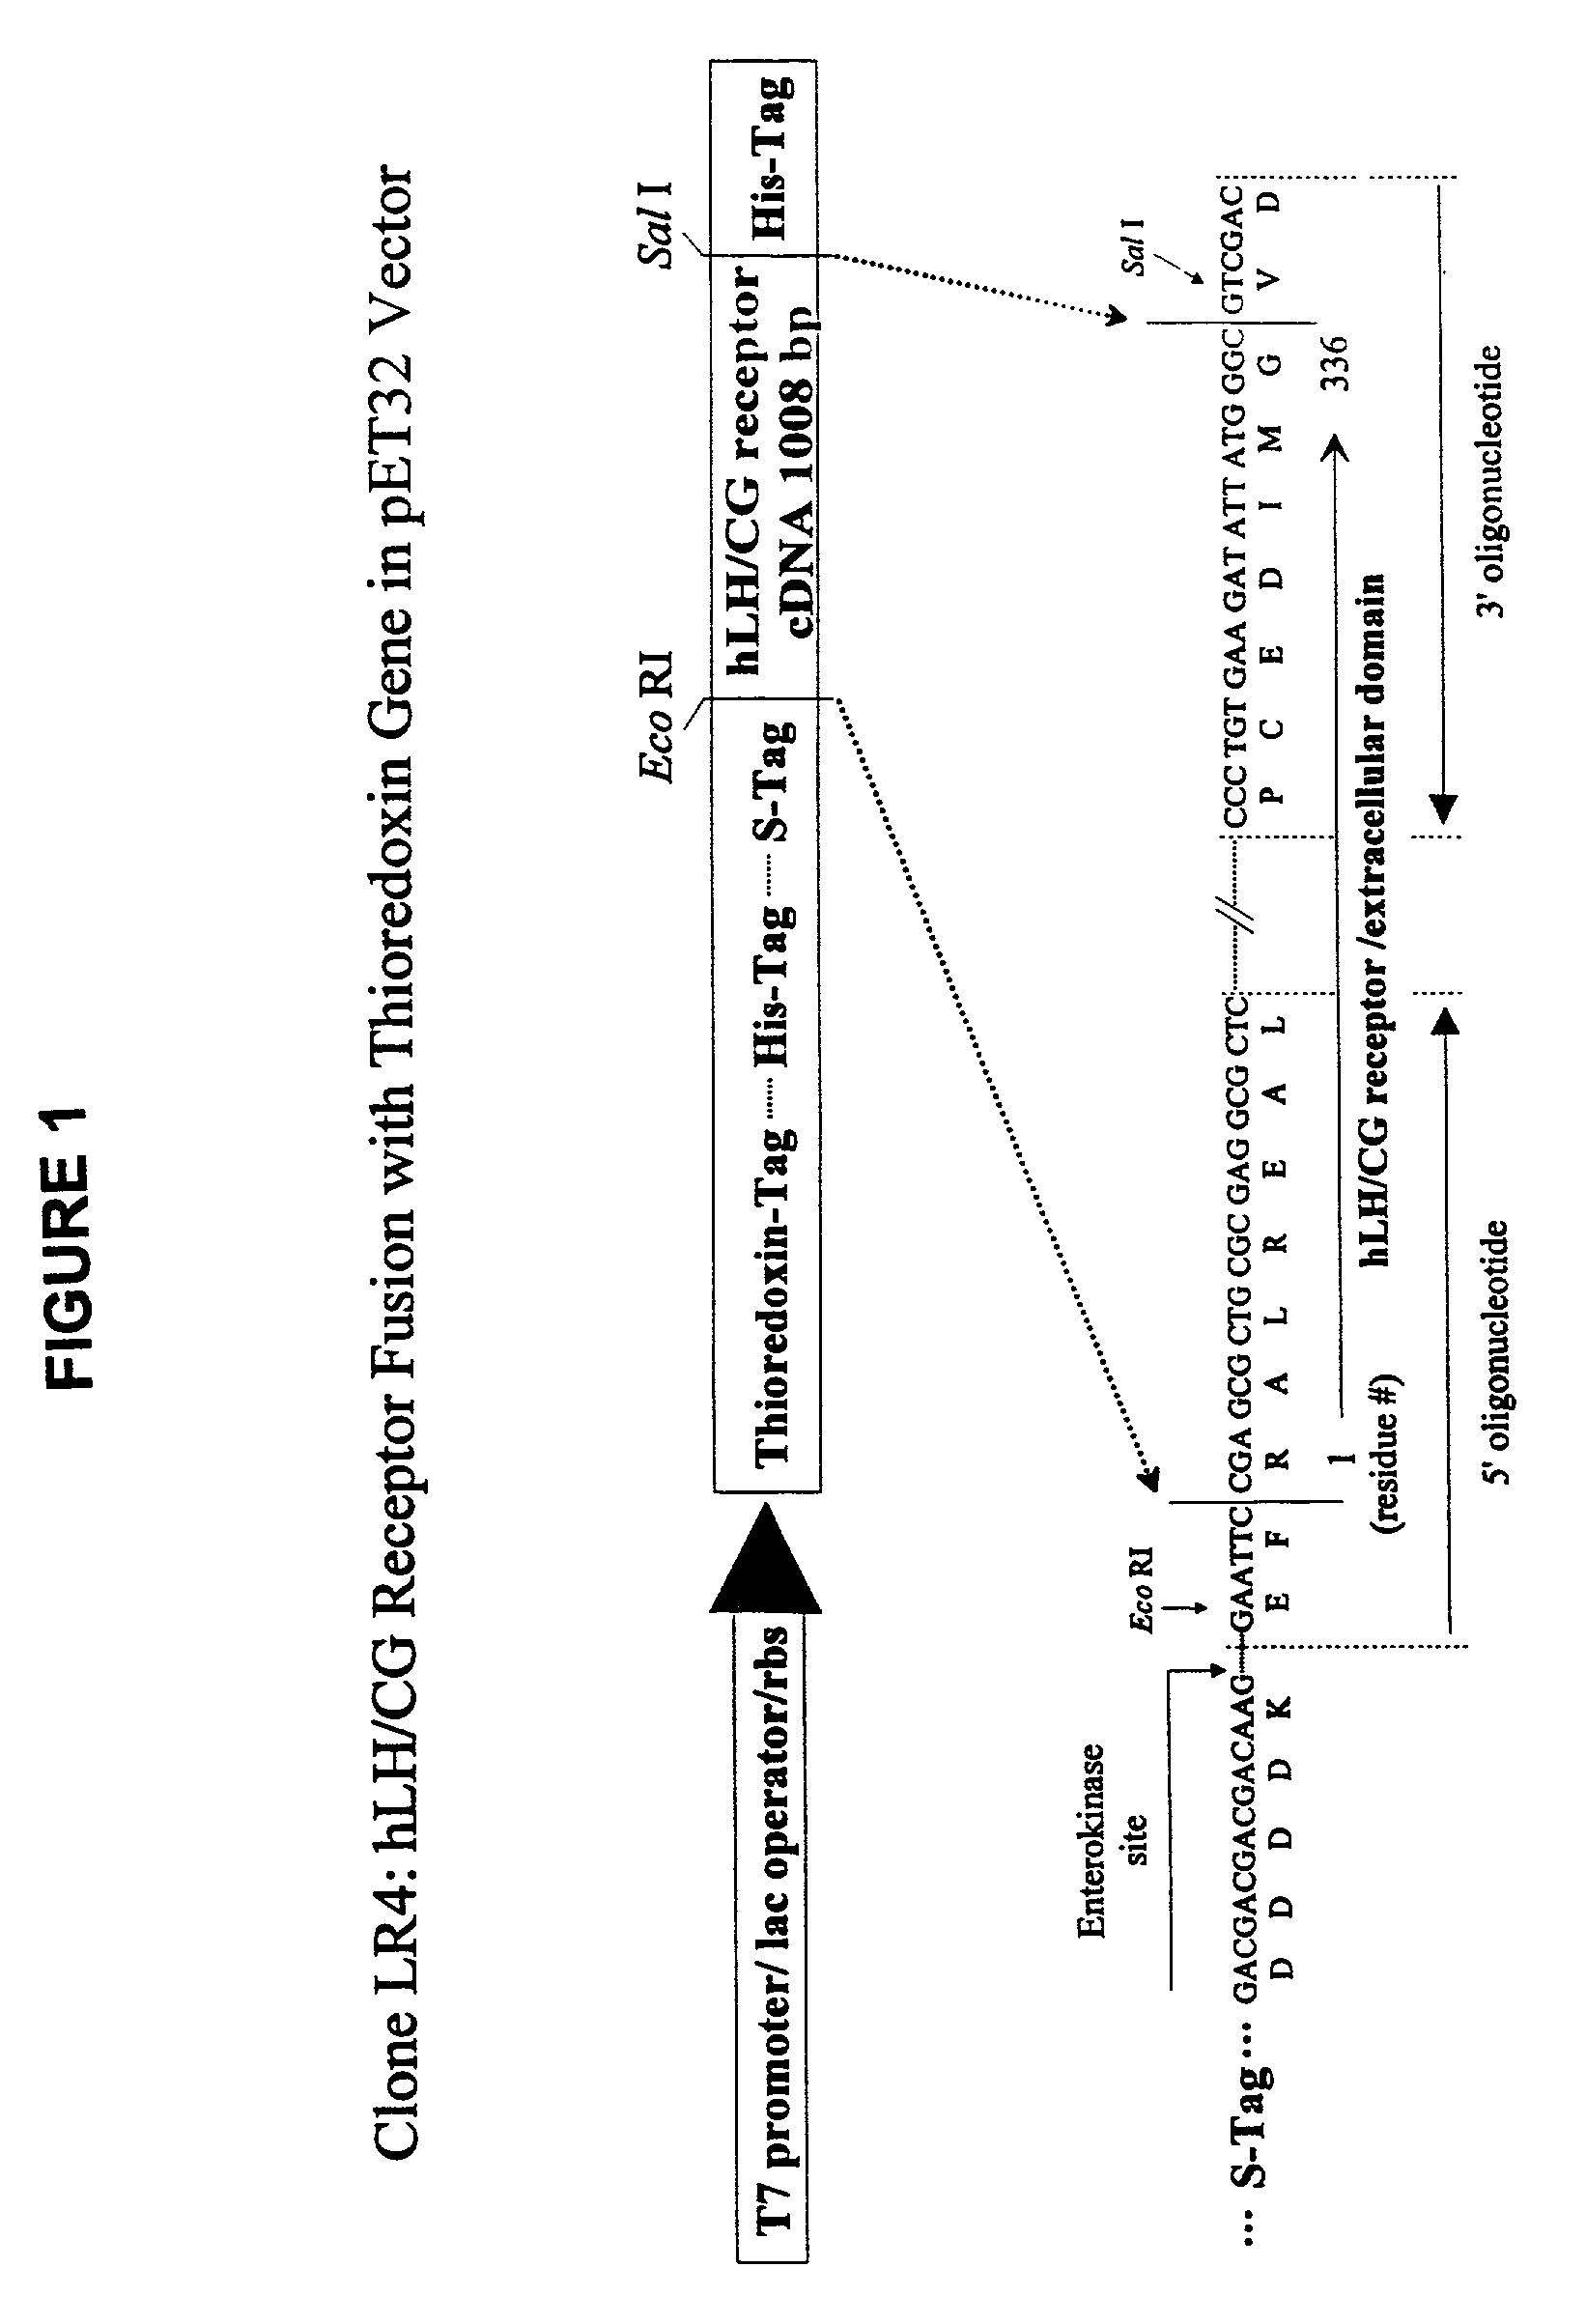 Expression of properly folded and soluble extracellular domain of a gonadotropin receptor